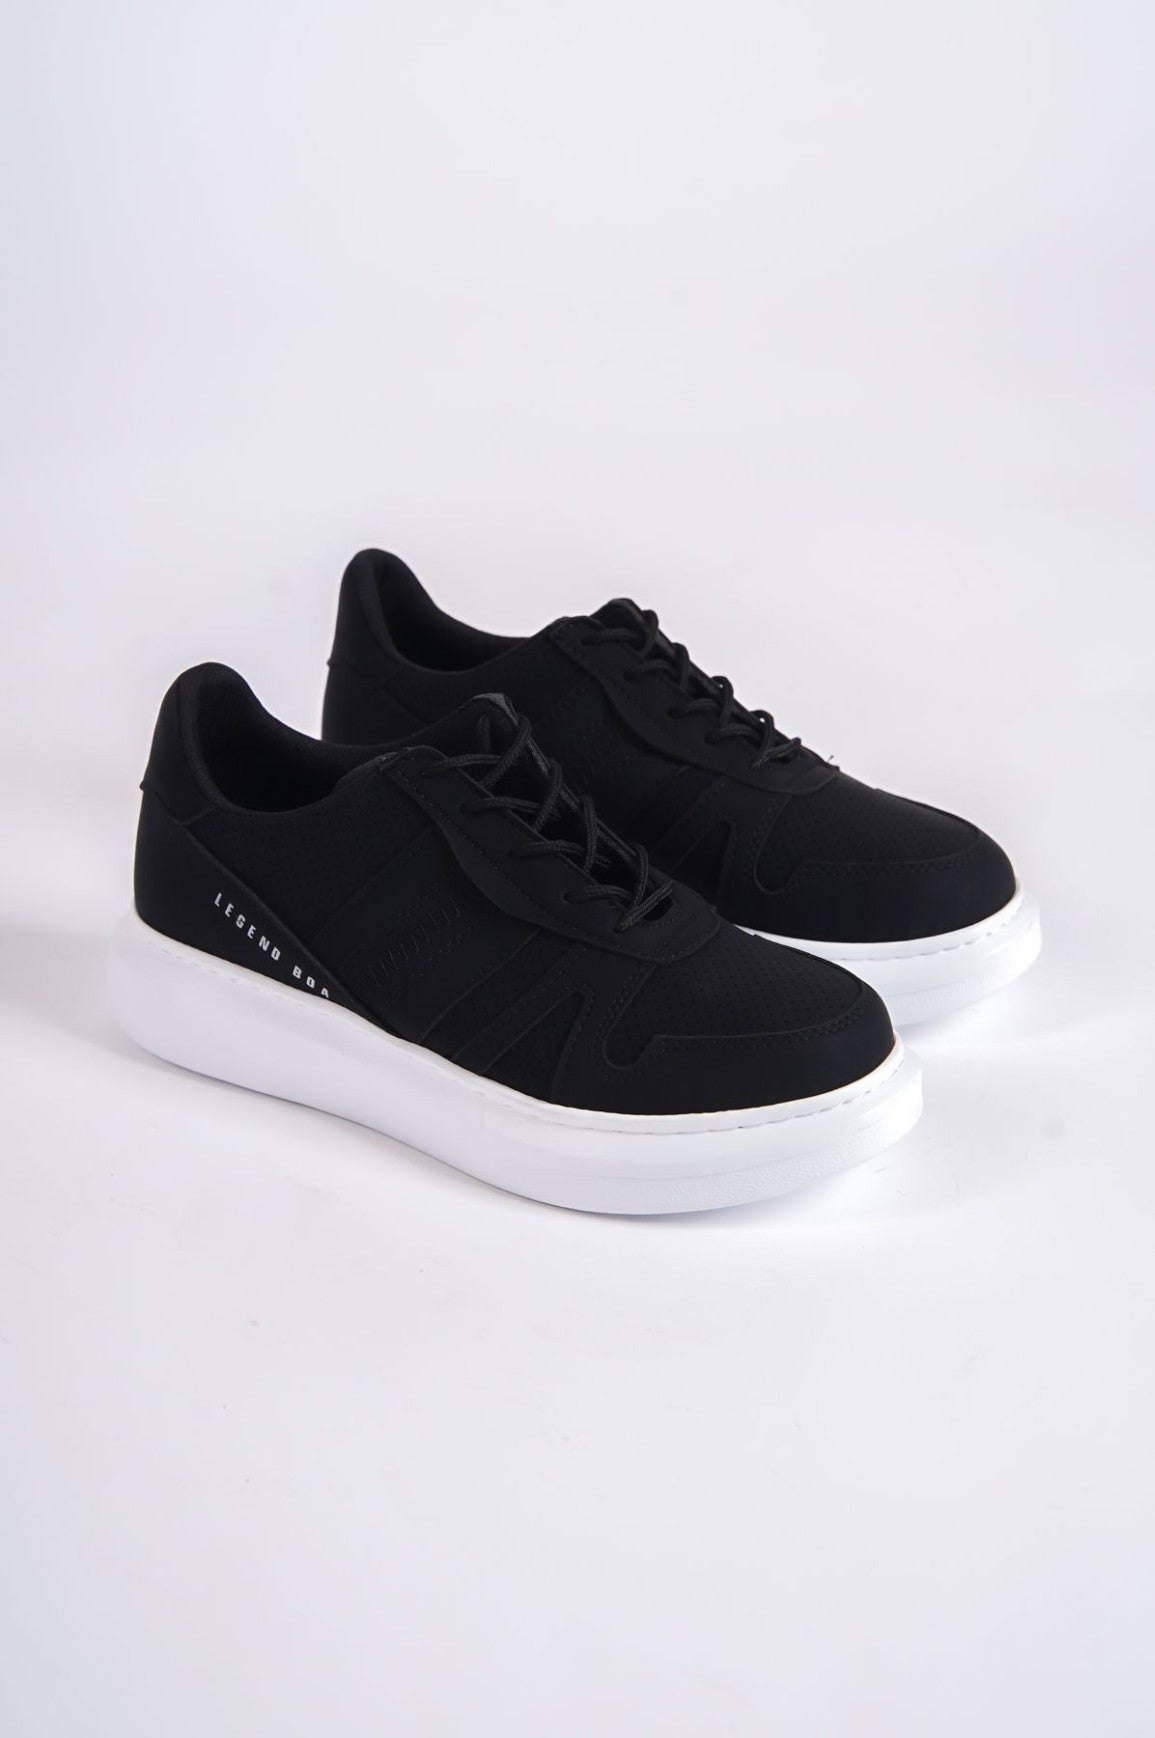 BA0548 Thick Side Patterned High Black White Sole Lace-Up Sports Men's Shoes - STREETMODE ™